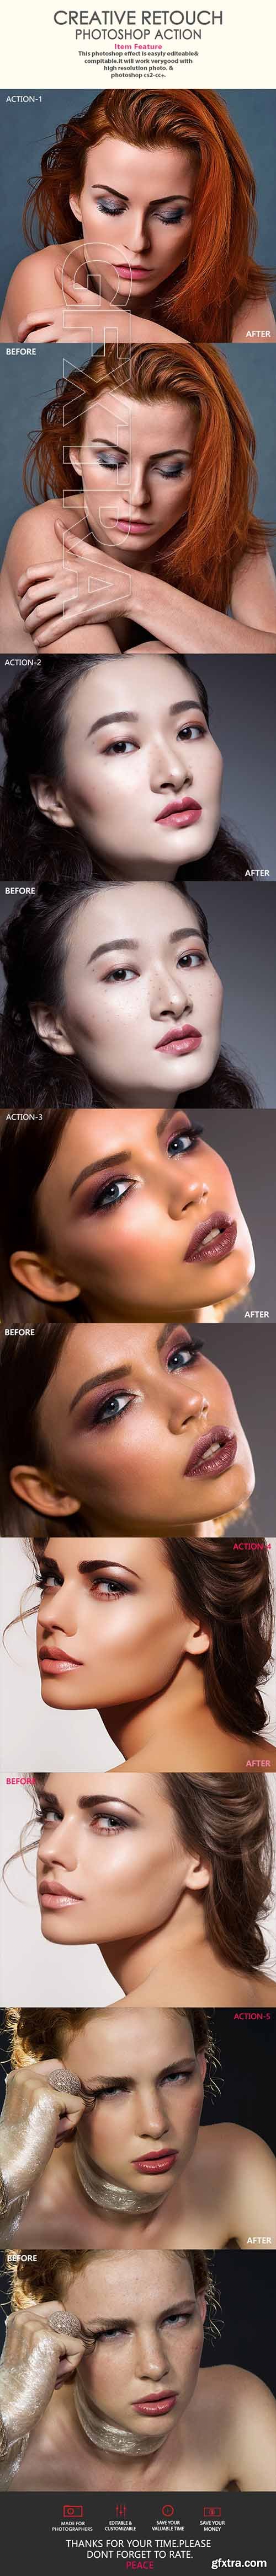 GraphicRiver - Creative Retouch Photoshop Action Photo Effects 21405013